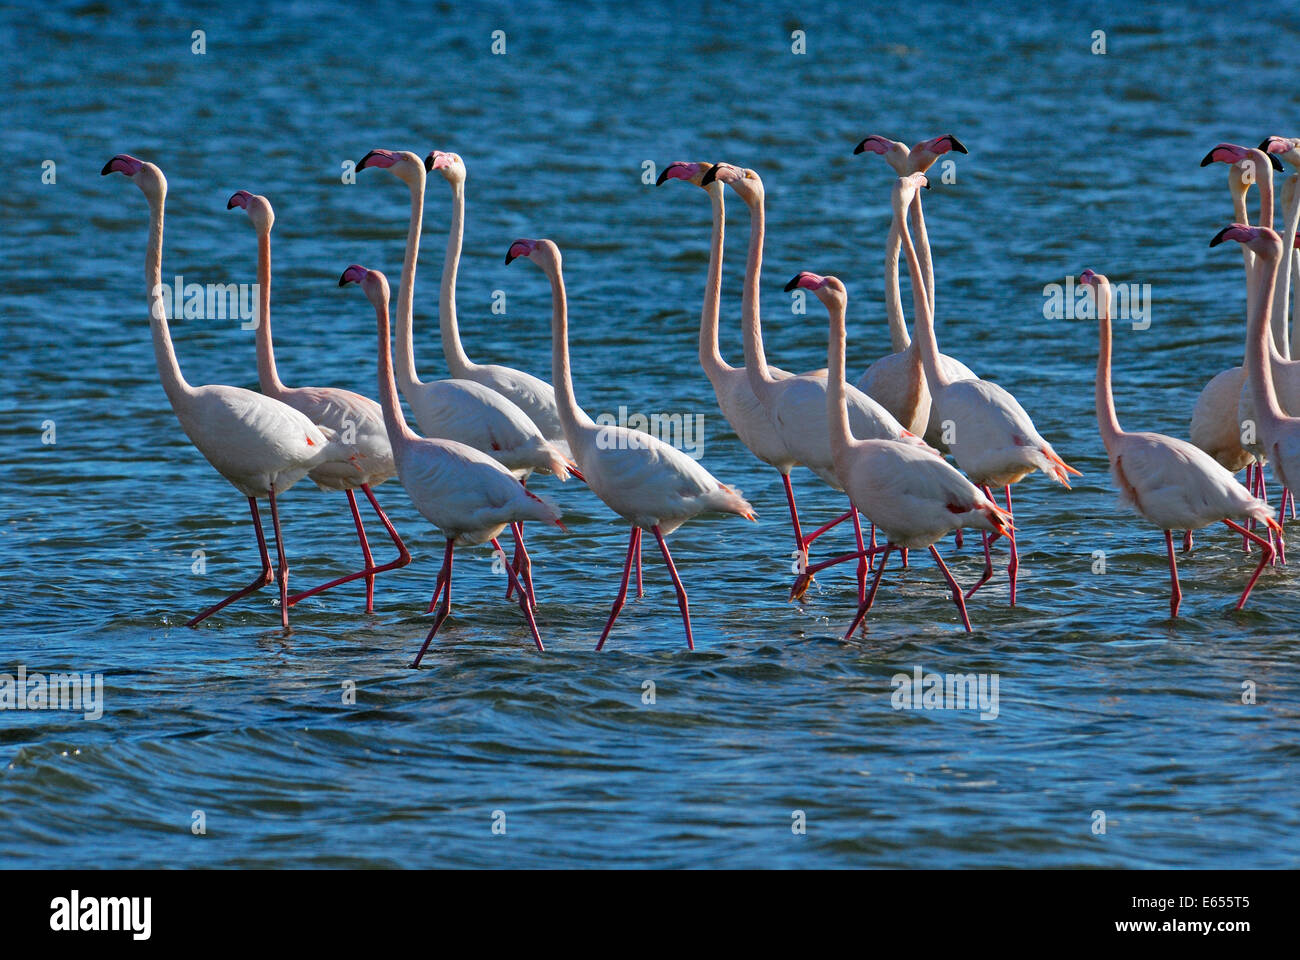 Flock of Greater Flamingoes (Phoenicopterus ruber) during mating season, Berre l'Etang, Provence, France, Europe Stock Photo